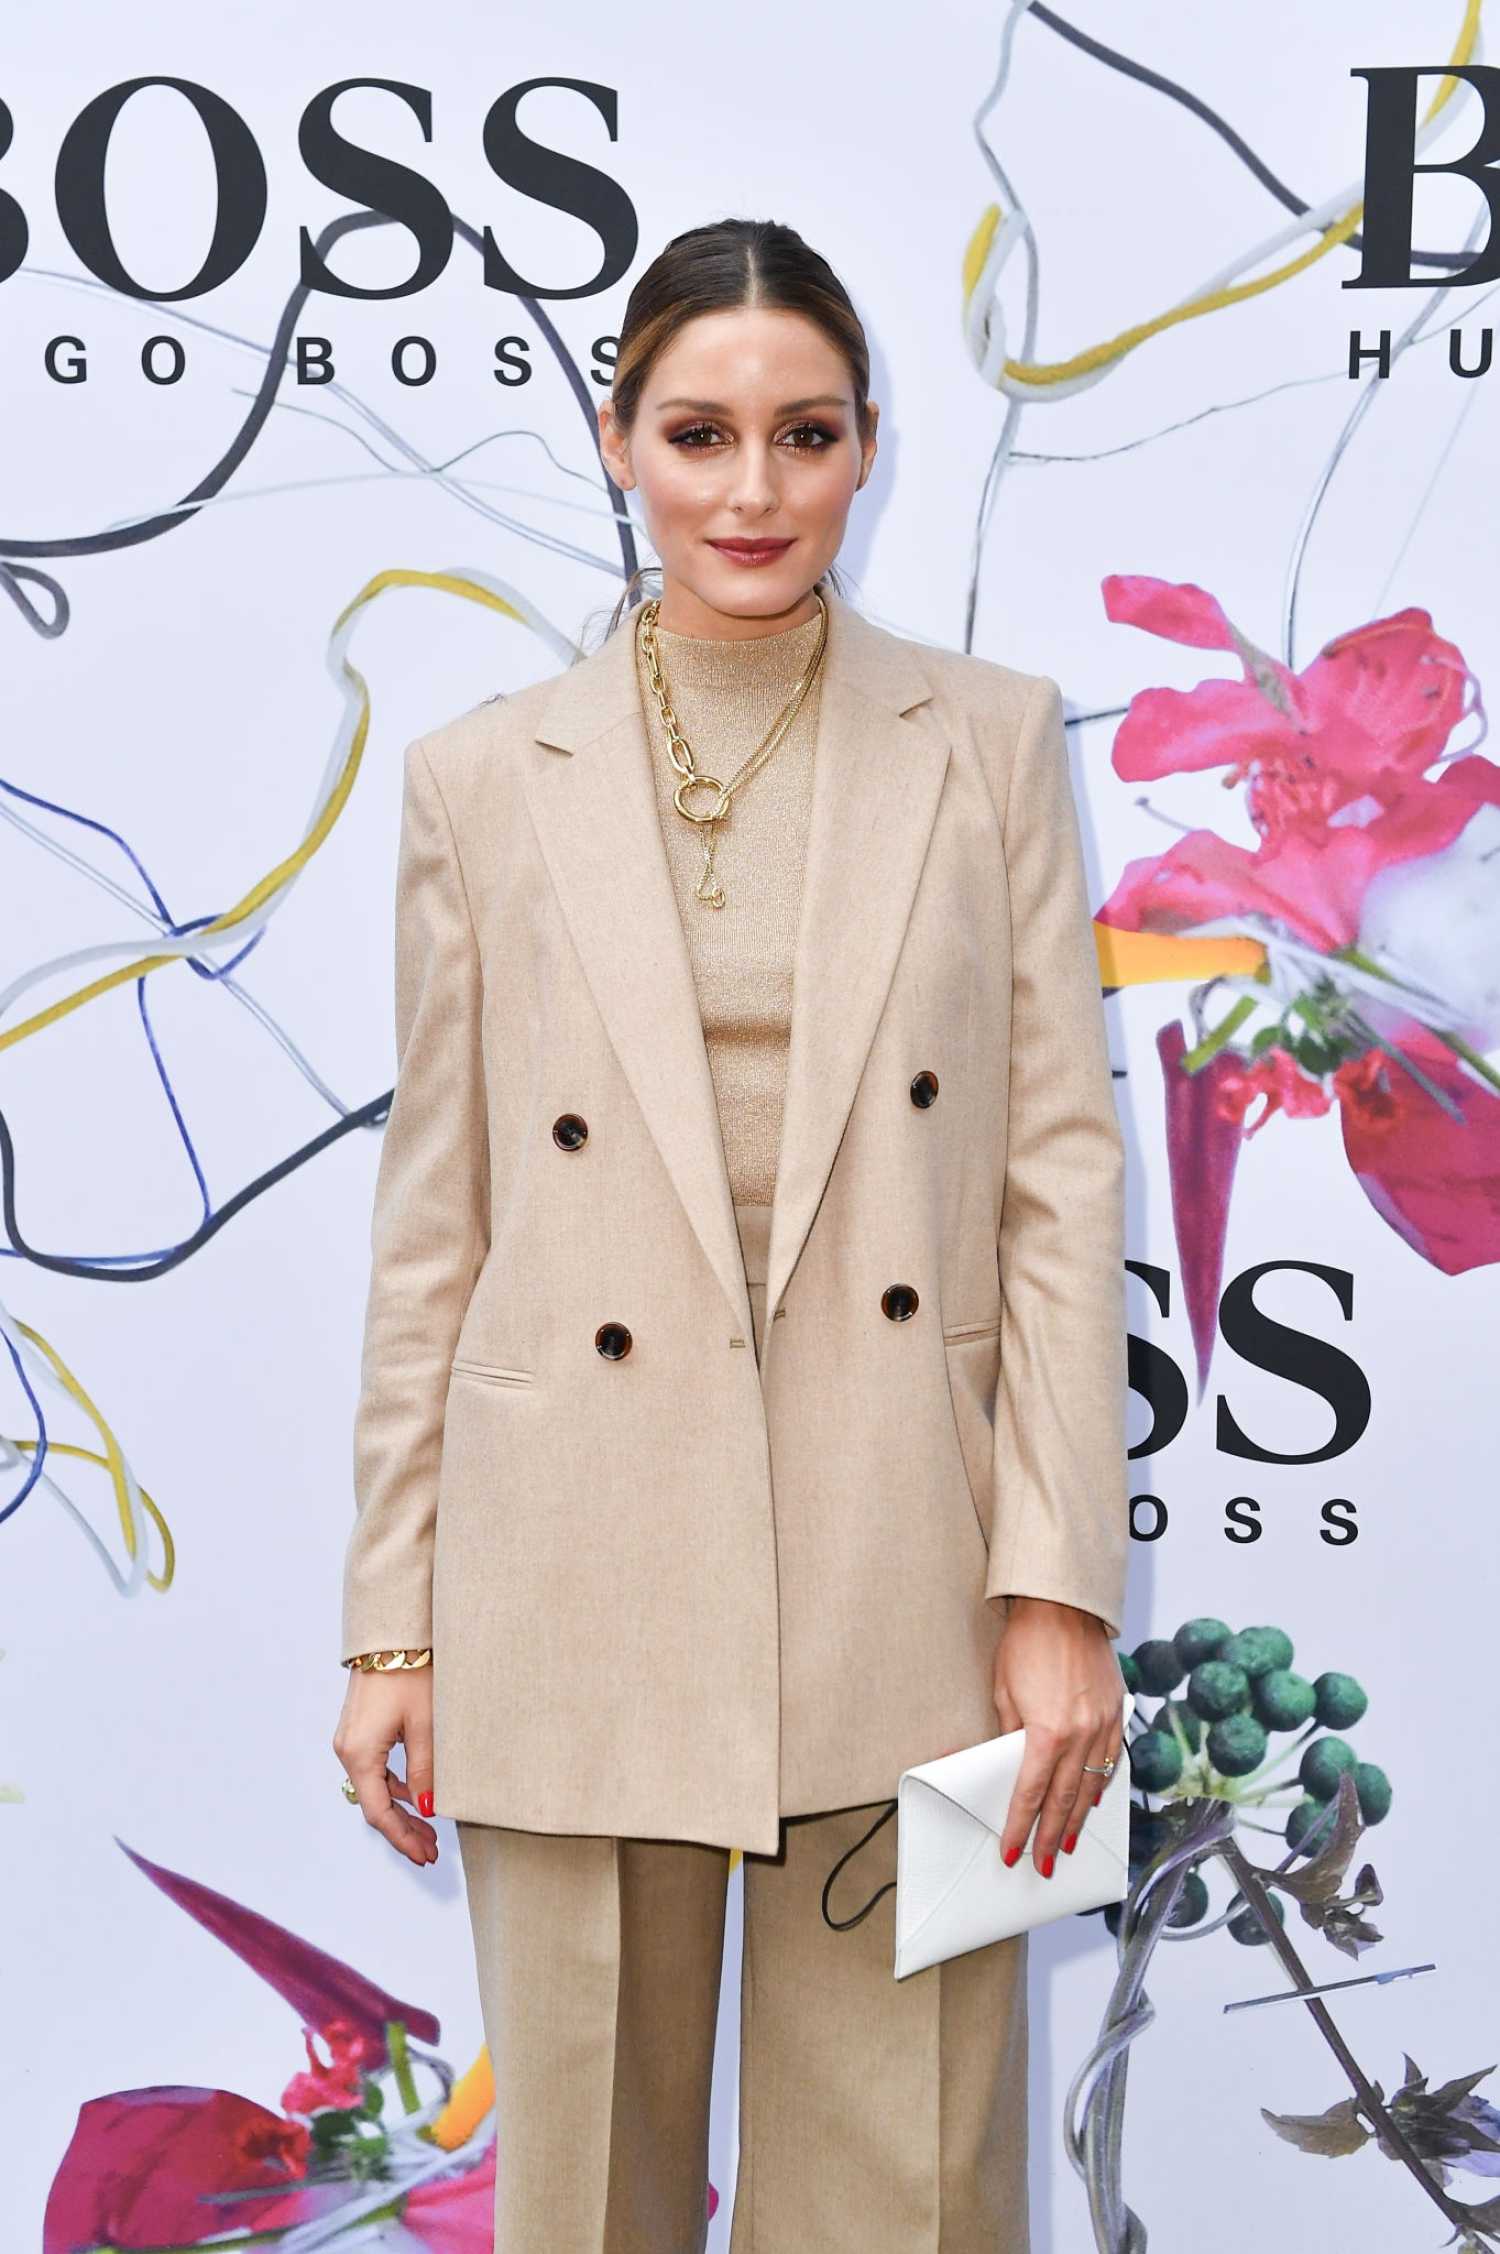 Olivia Palermo in a Beige Suit Attends the Boss Fashion Show During the ...